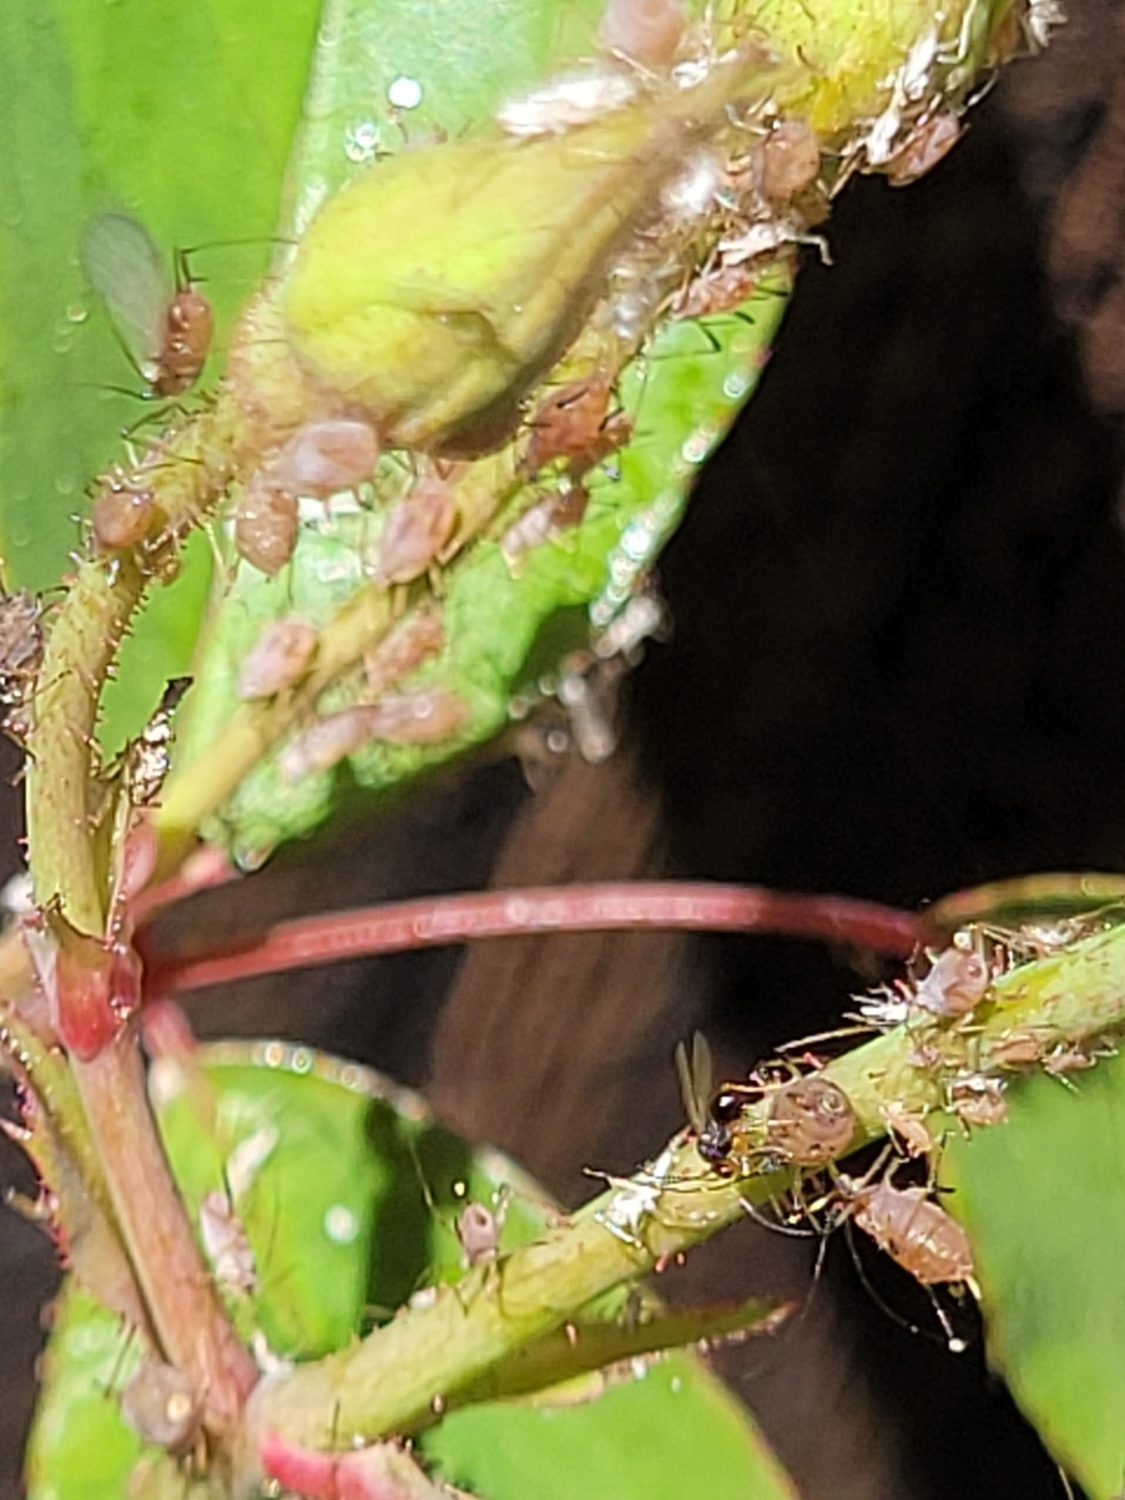 a closeup of a plant. its stems have a collection of aphids crawling on them